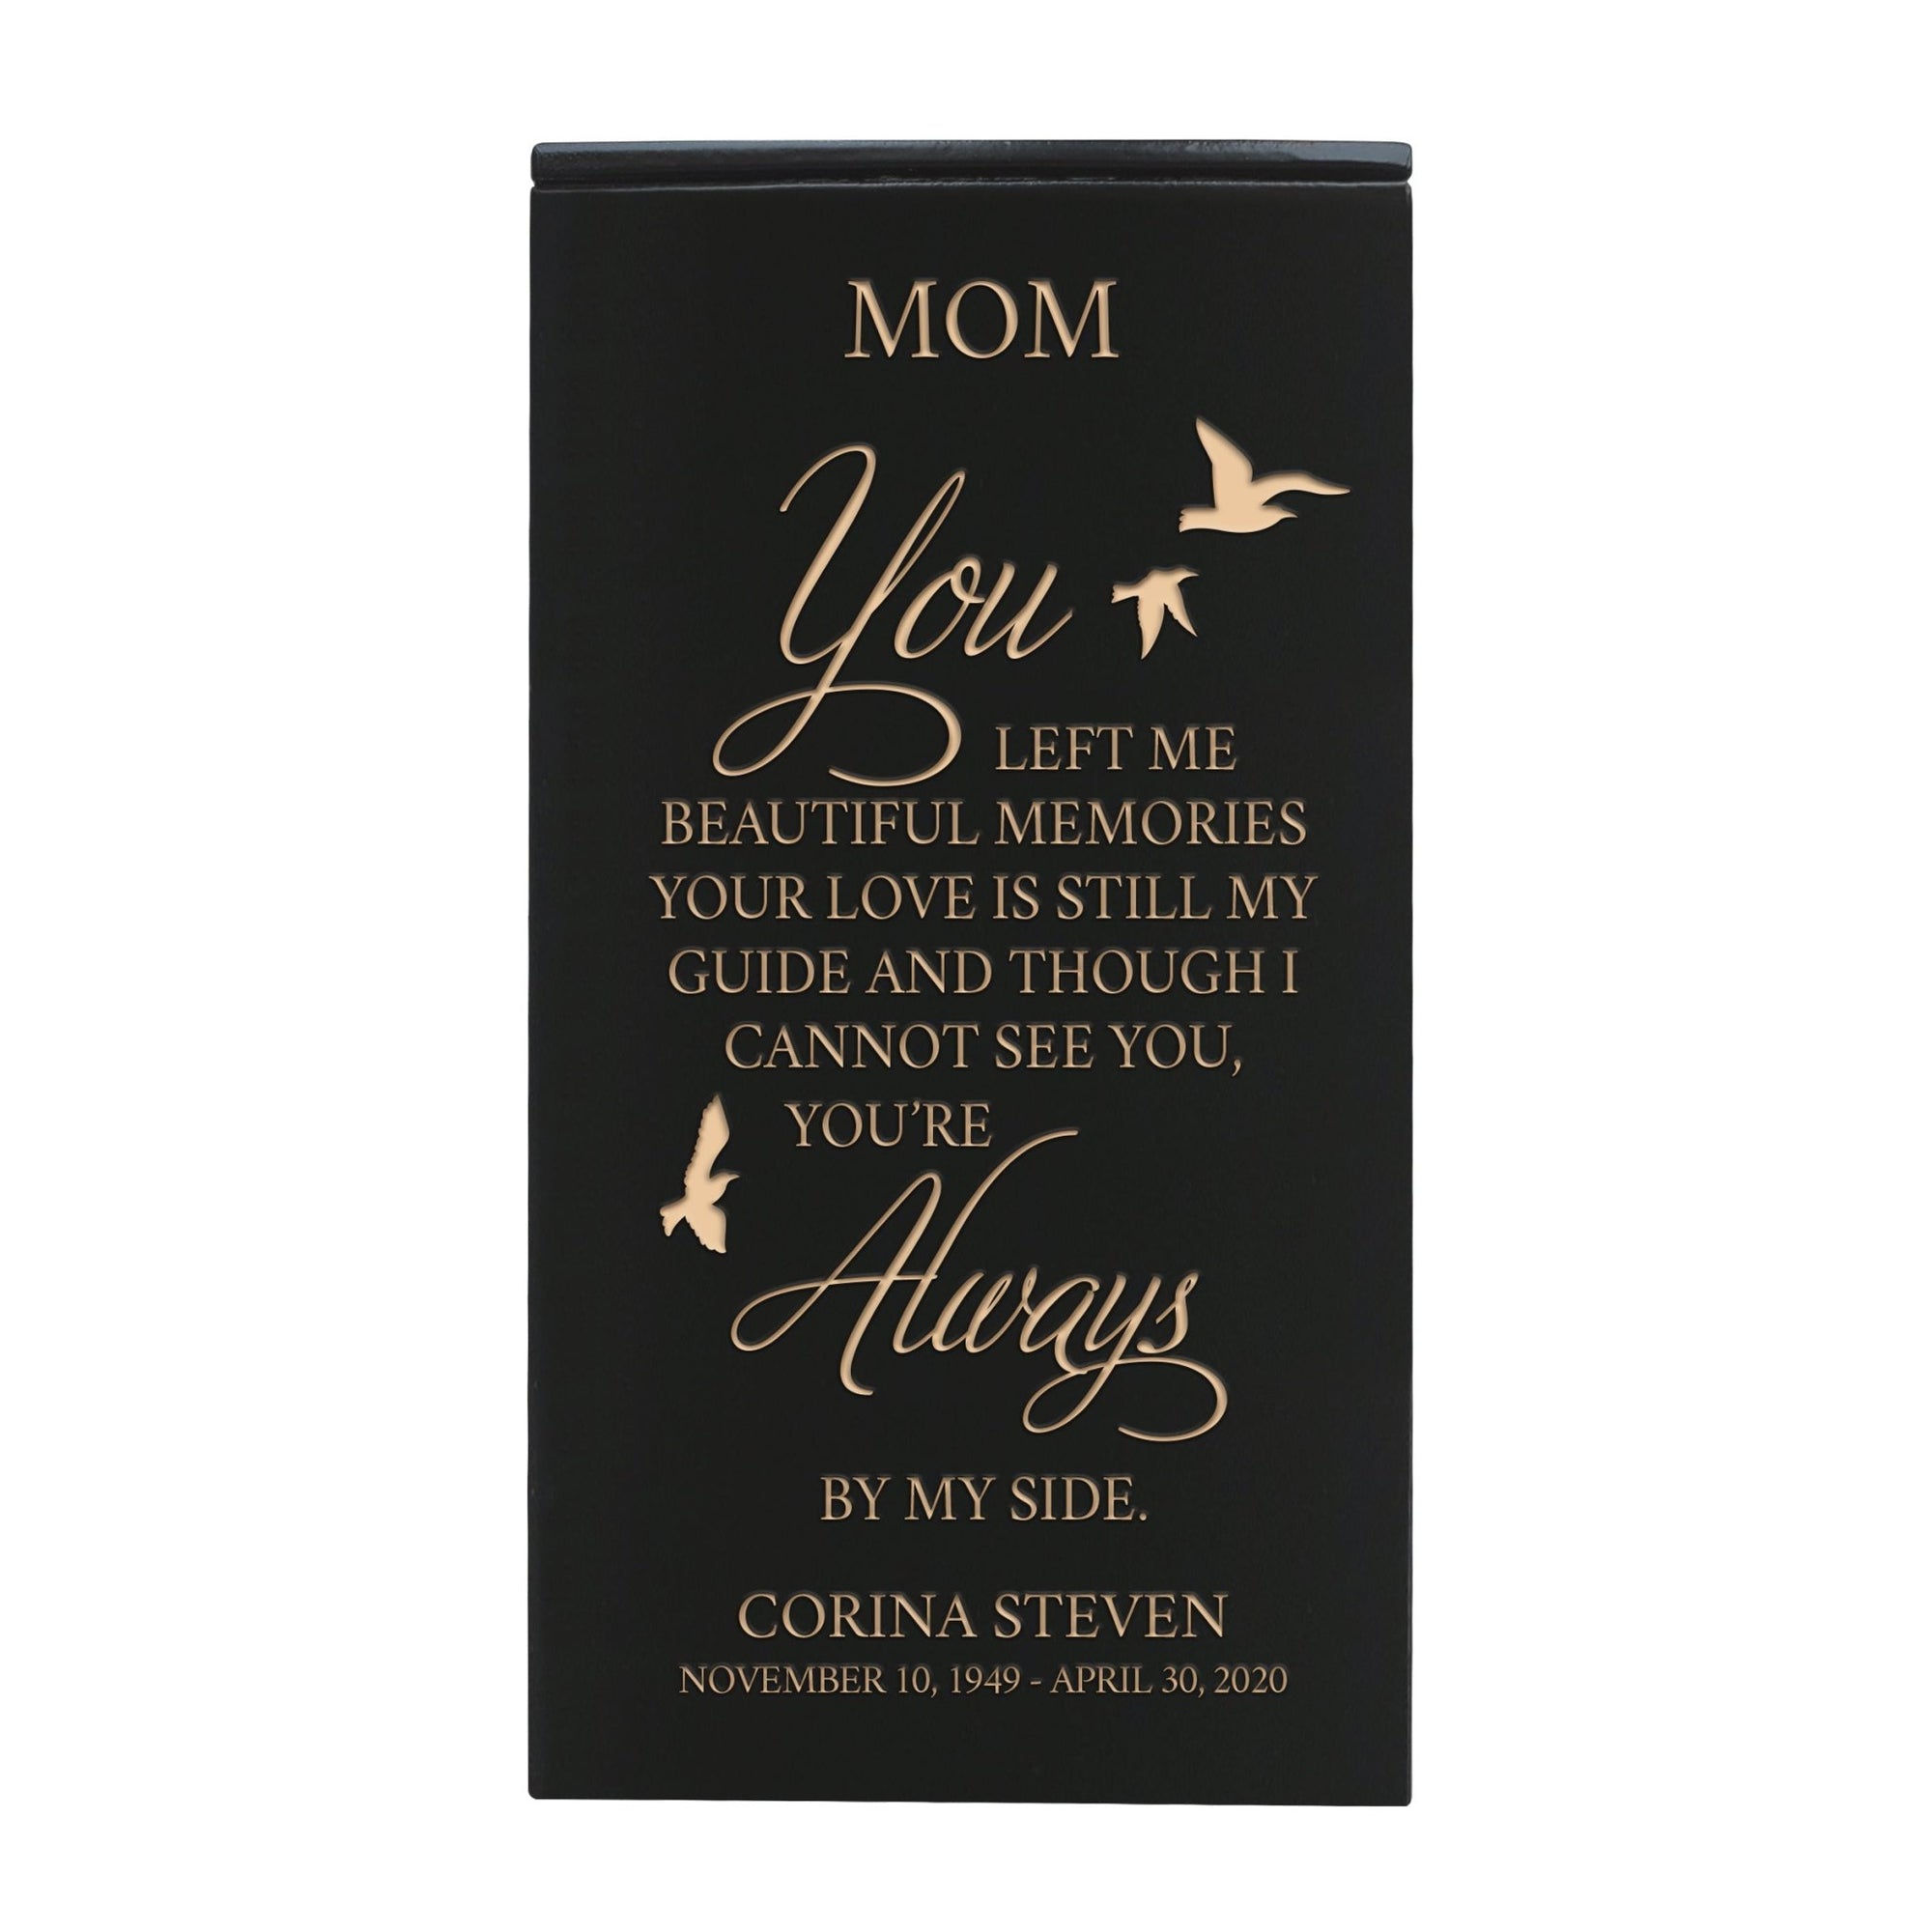 Custom Engraved Memorial Cremation Keepsake Urn Box holds 100 cu in of Ashes in - Mom, You Left Me Beautiful - LifeSong Milestones